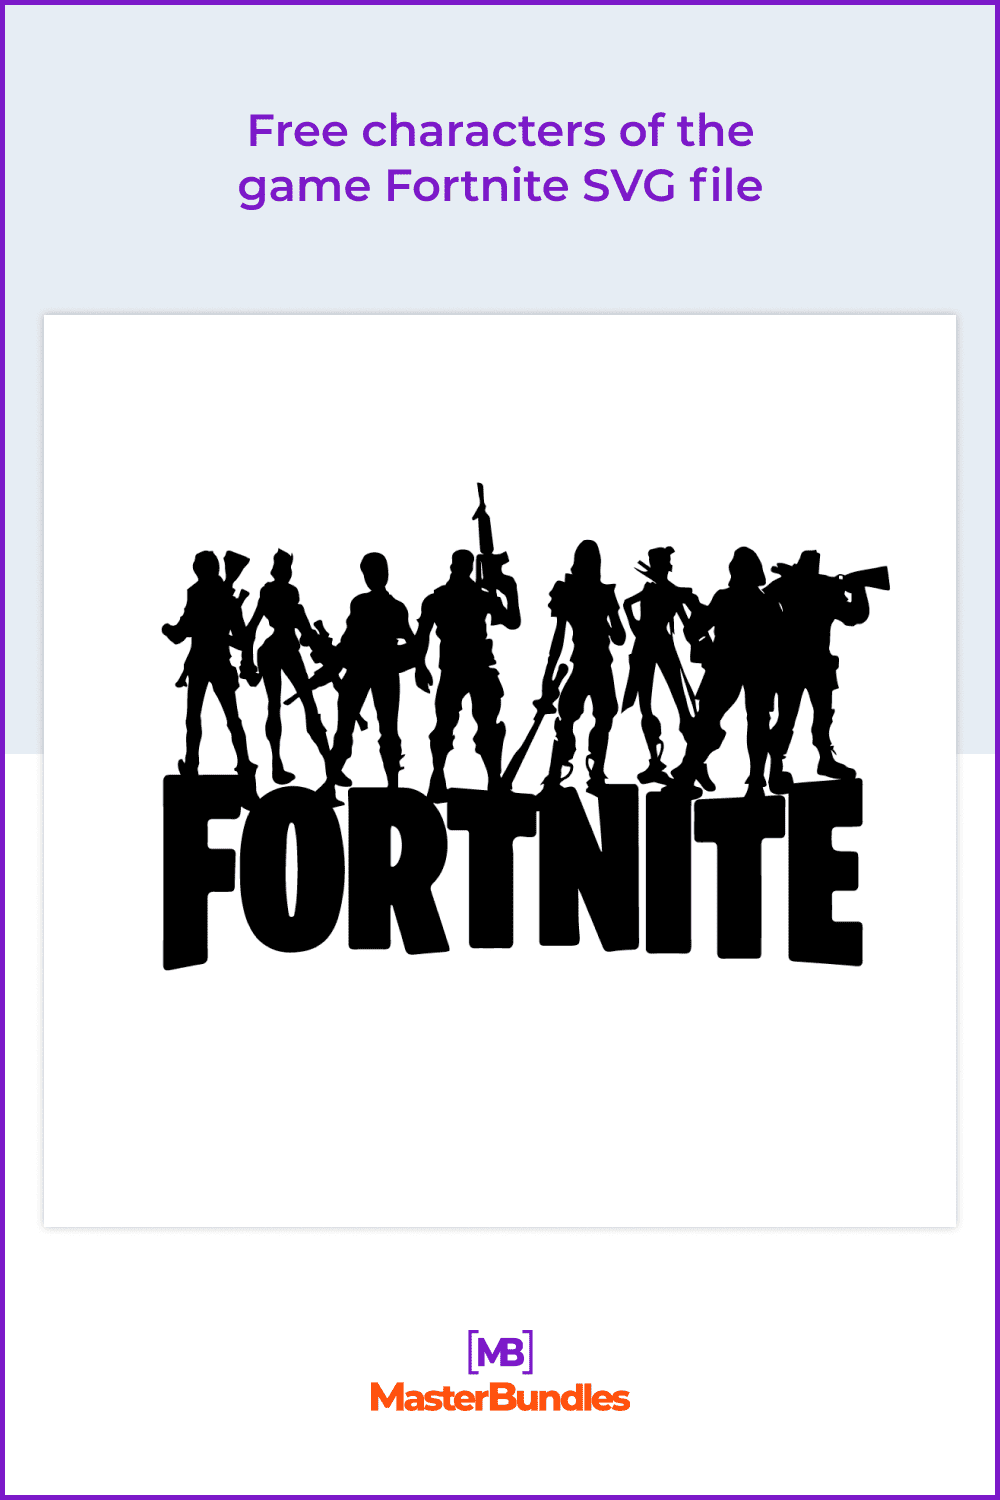 Free characters of the game Fortnite SVG file.